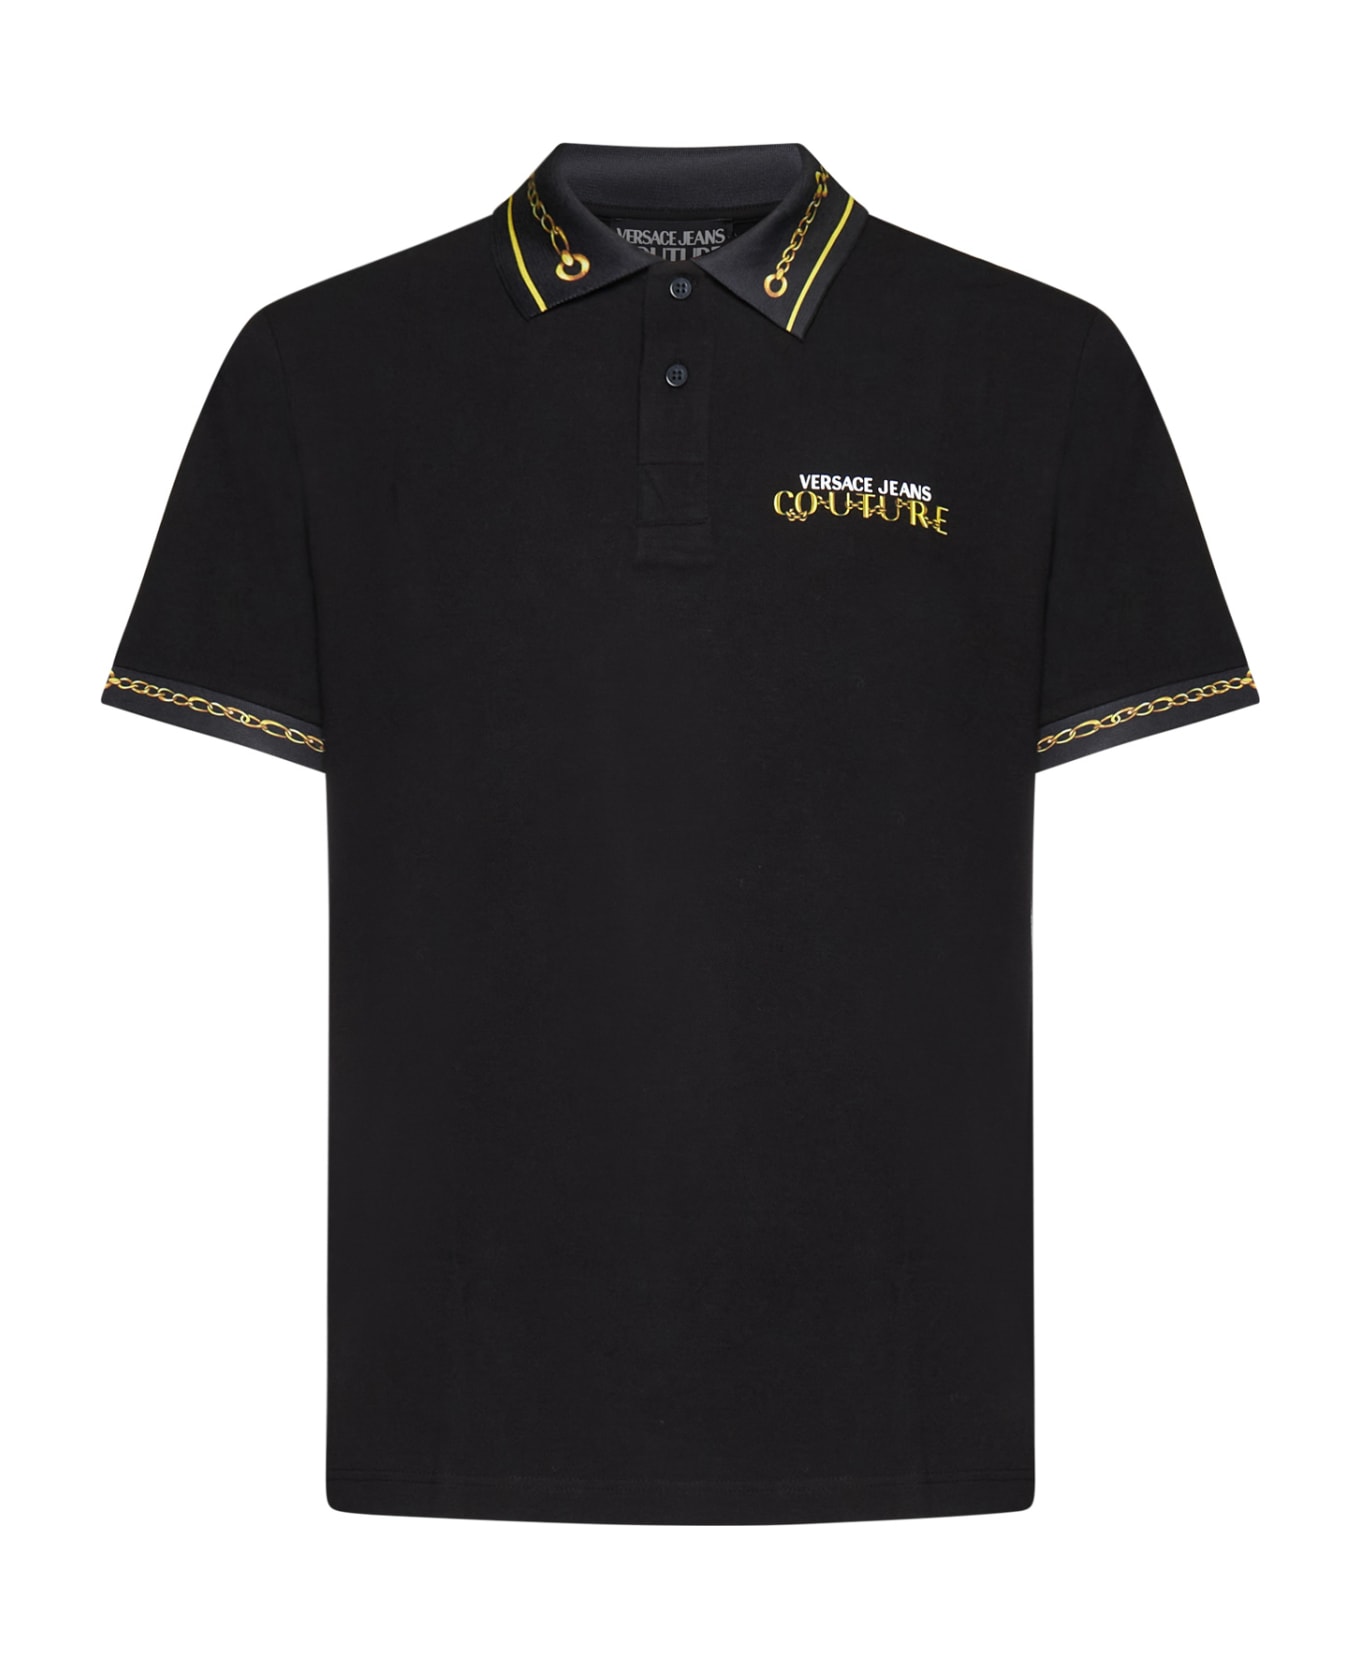 Versace Jeans Couture Chain-link Polo Shirt - Black gold